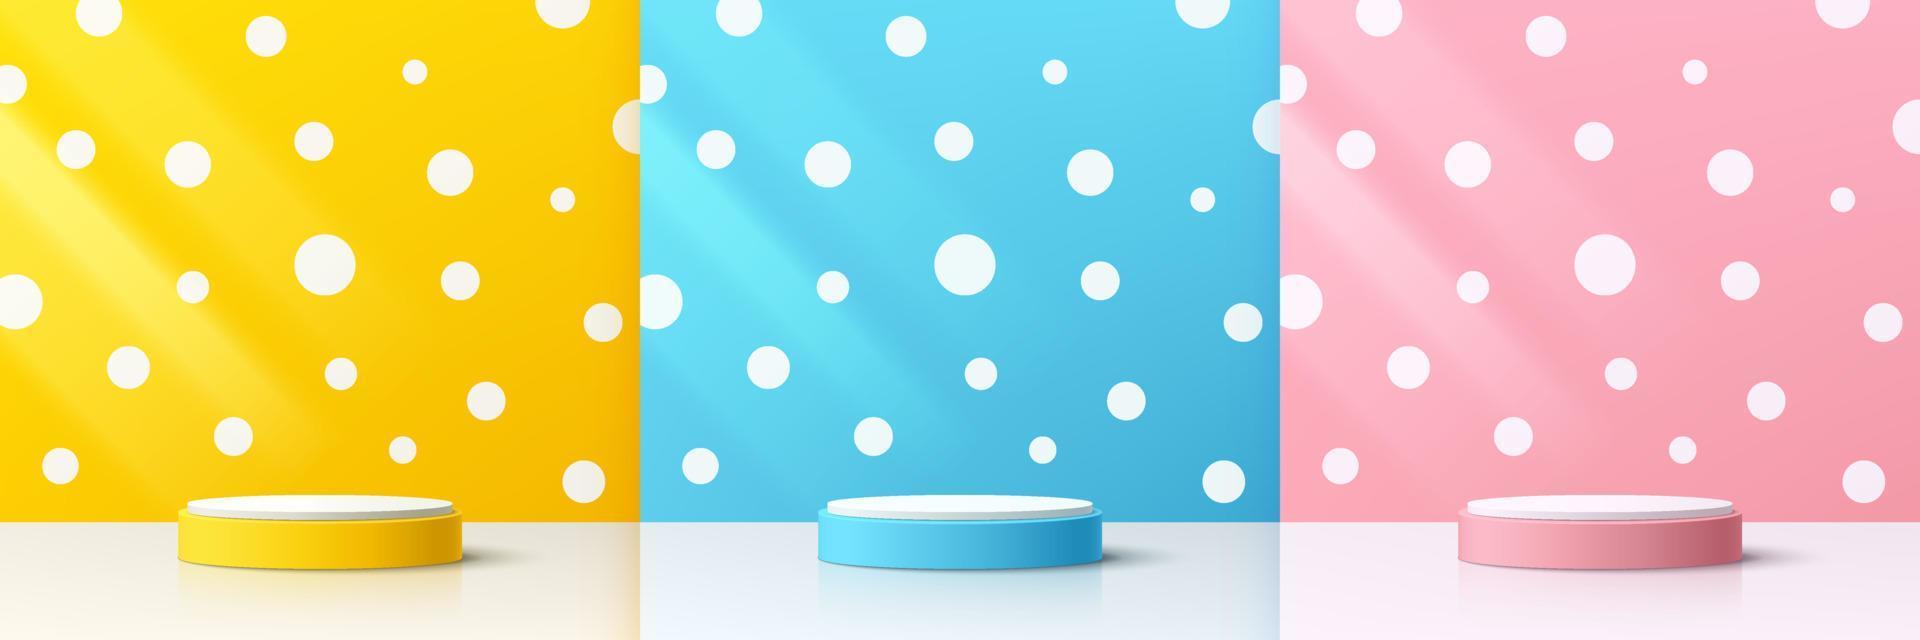 Set of abstract yellow, blue and pink realistic 3d cylinder pedestal podium with white polka dots on the wall. Vector rendering geometric forms. Pastel minimal scene. Stage showcase, Product display.